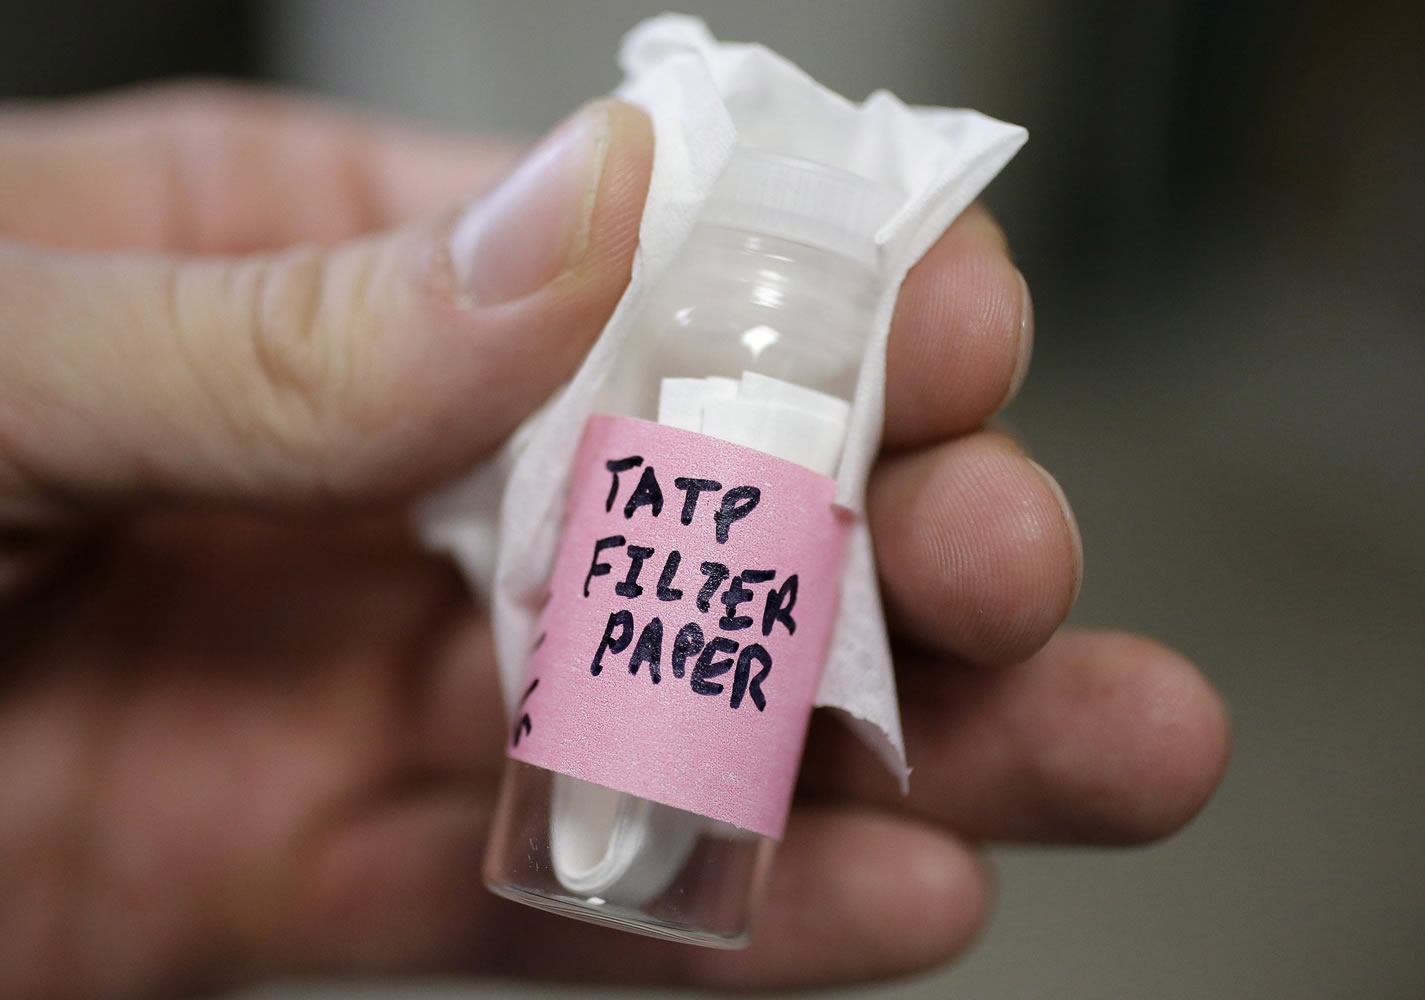 Zachary Caron, of Hope, R.I., a chemical engineering graduate student at the University of Rhode Island, displays a vial containing TATP filter paper in a URI laboratory on the school&#039;s campus in South Kingstown, R.I. The filter paper contains small amounts of the explosive TATP and emits a vapor that is used in testing and developing detectors for the presence of the explosive. TATP was used by the attackers in the Paris attacks.